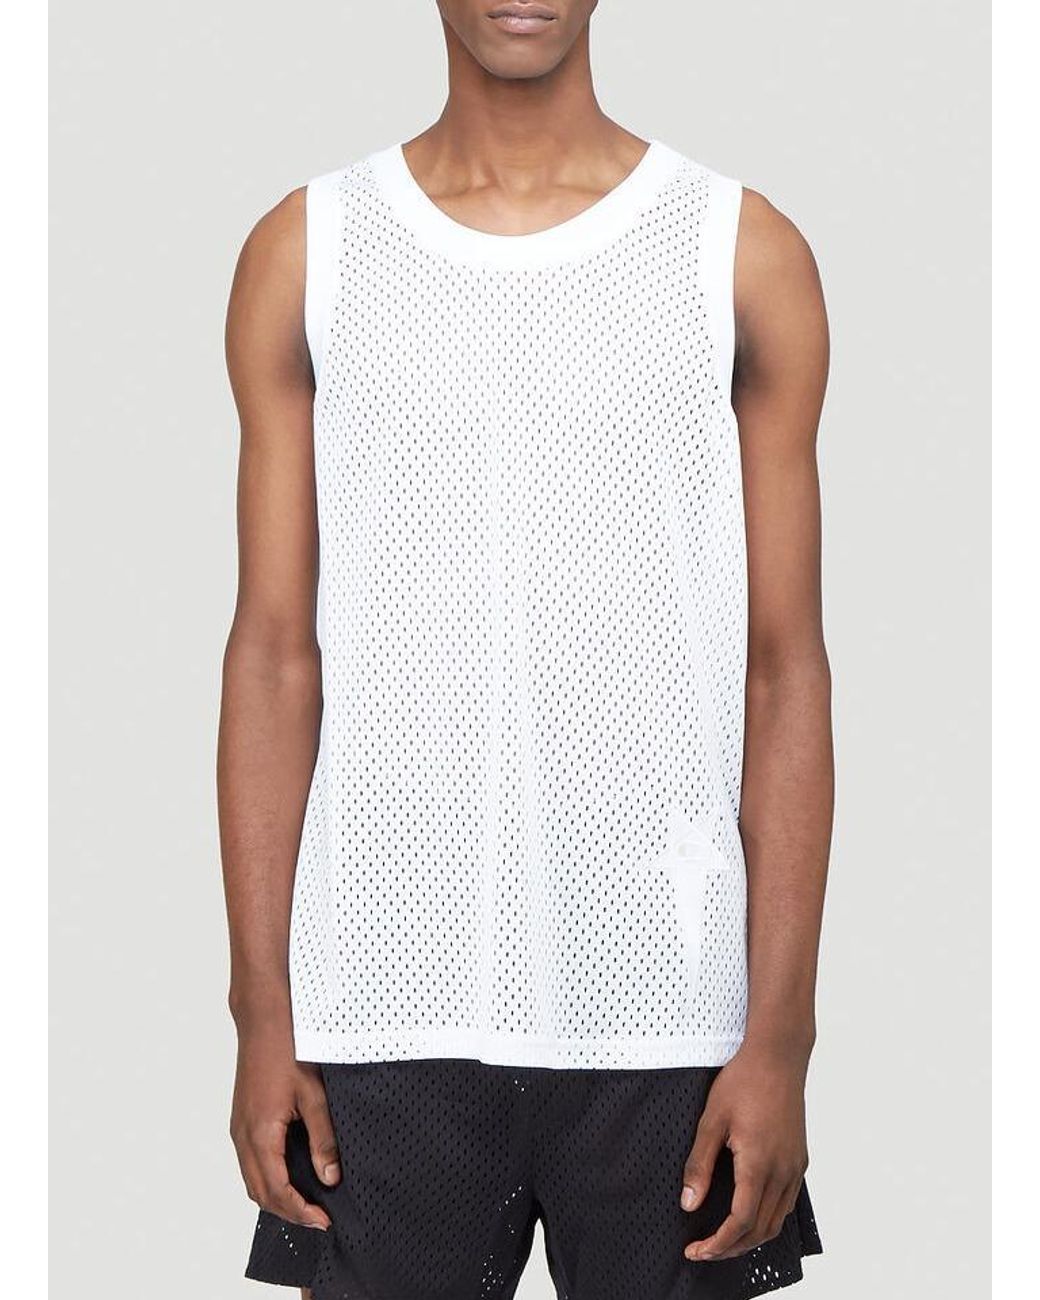 Rick Owens Synthetic X Champion Mesh Tank Top in White for Men - Lyst